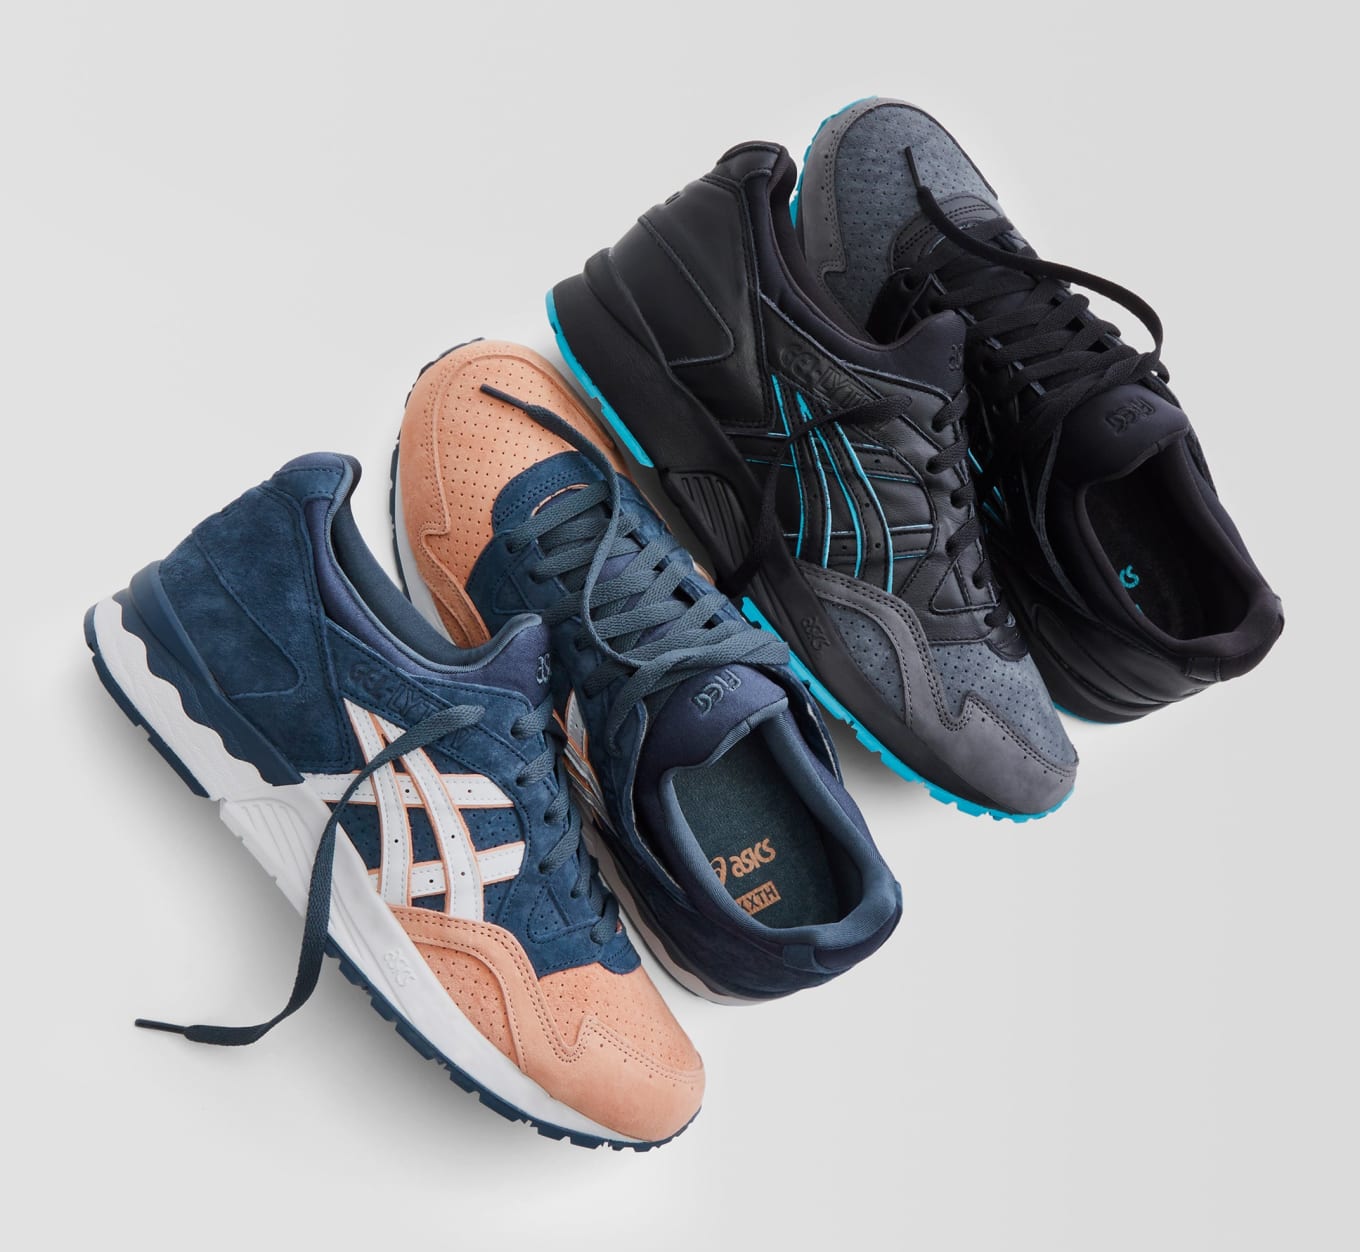 Ronnie Fieg Kith x Asics Gel-Lyte 5 'Salmon Toe' and 'Leather Back' Release  | Sole Collector